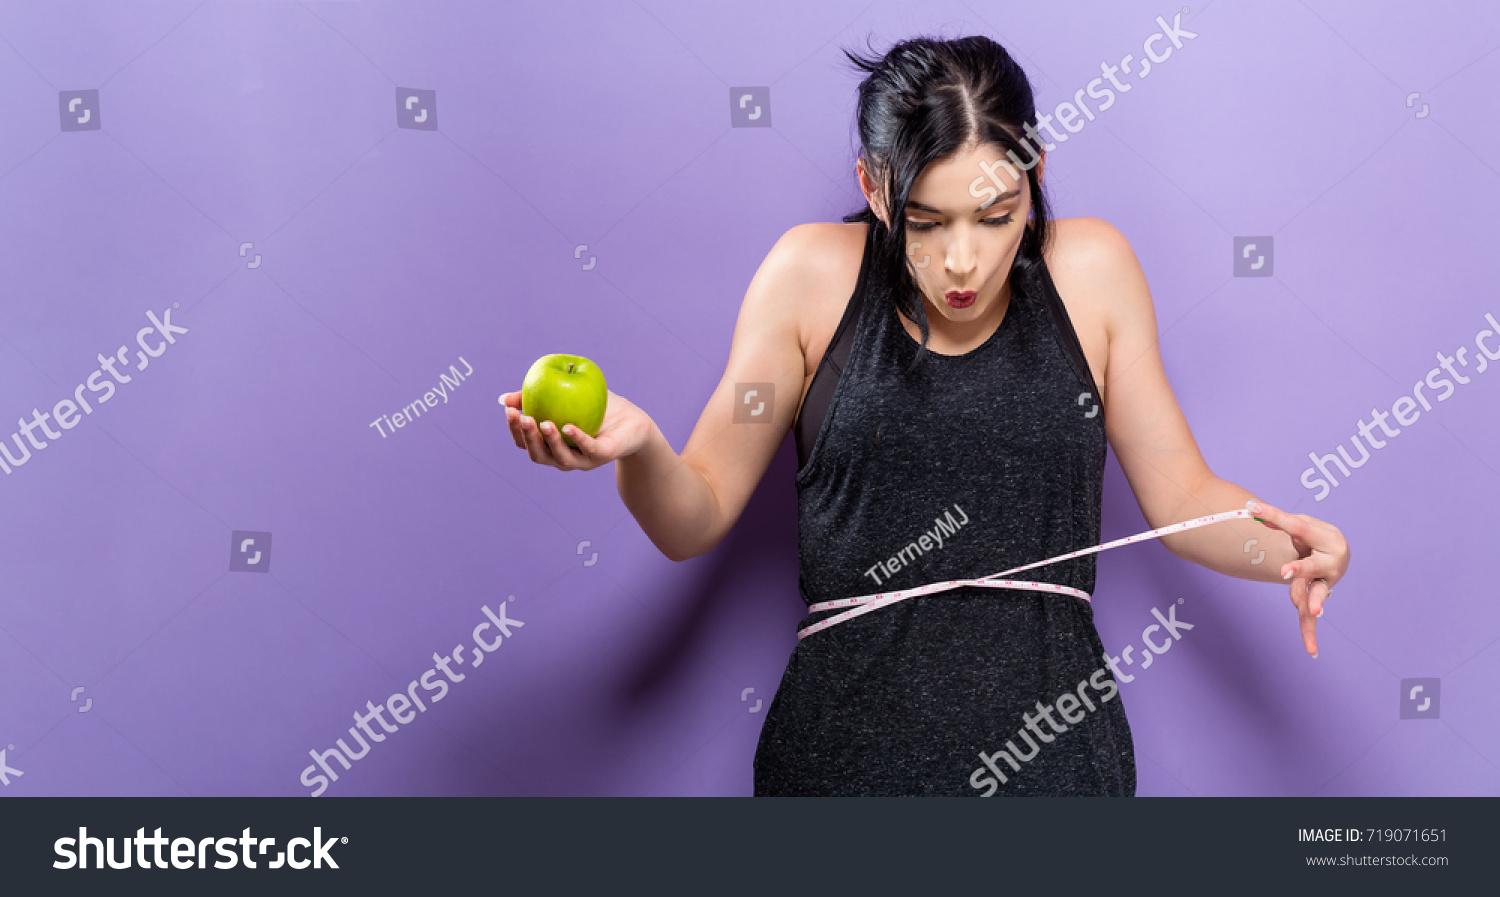 Young woman measuring her waist with a tape measure #719071651